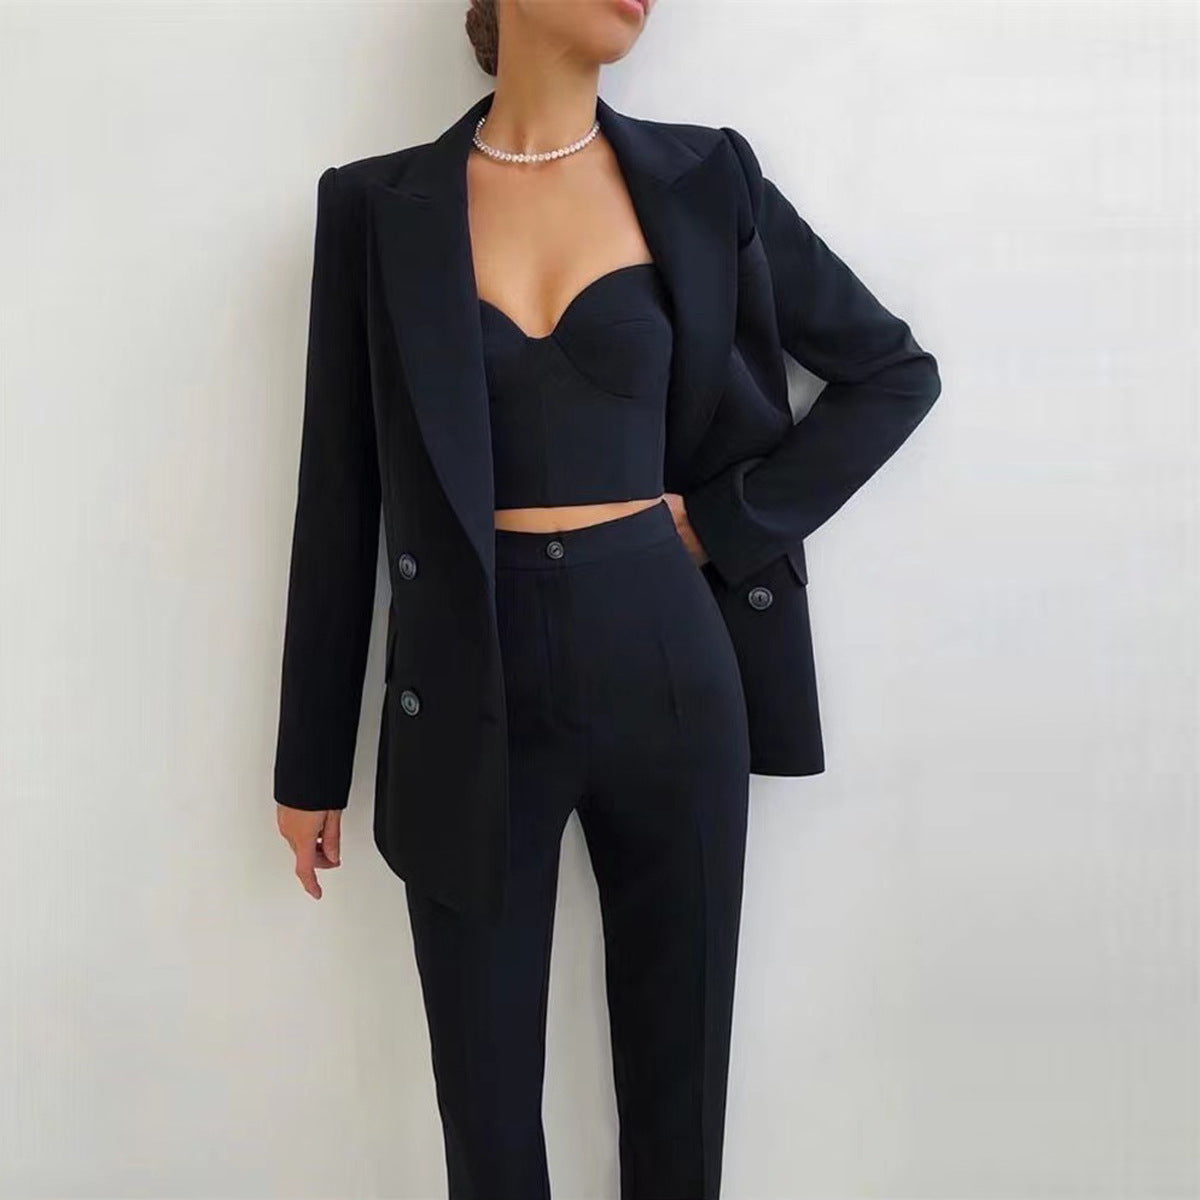 Fashion Outfits | Rare Office Fashion Casual Business Outfit 3-piece Set